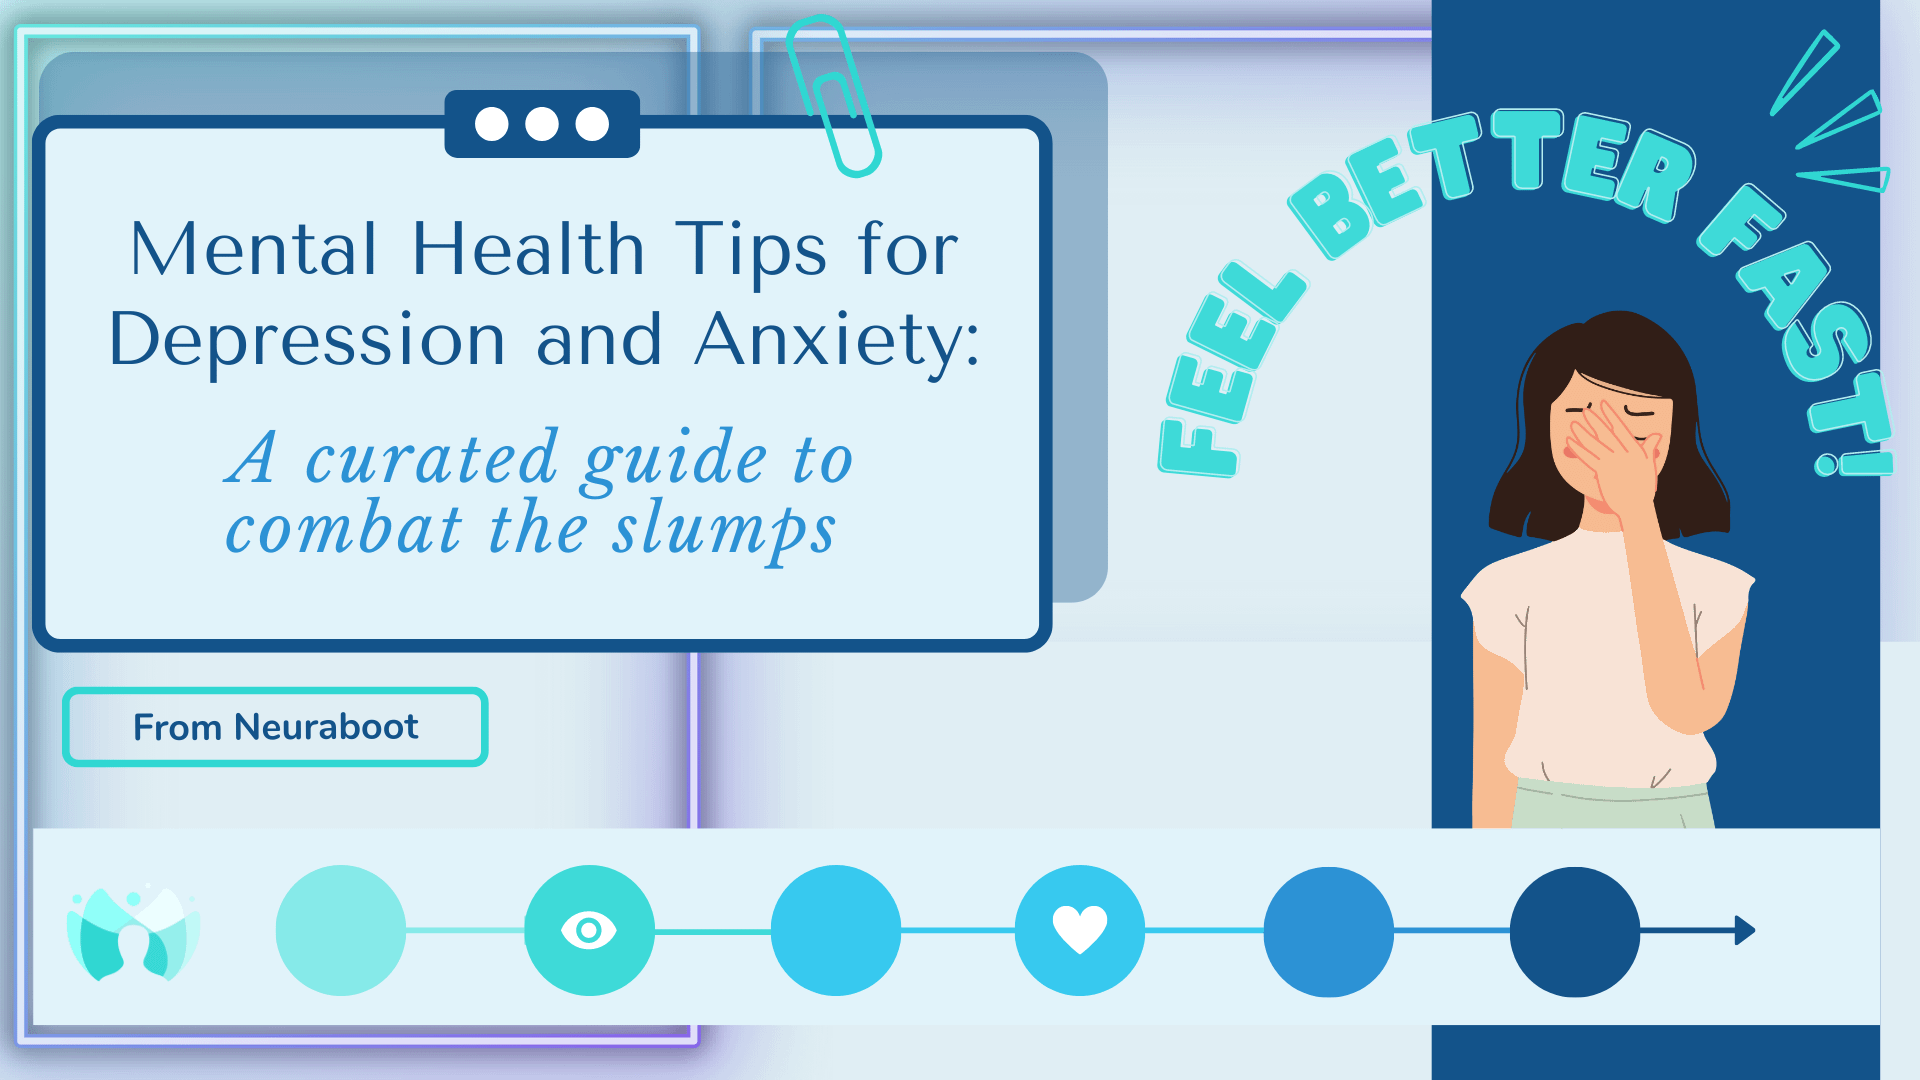 Mental Health Tips for Depression and Anxiety: A curated guide to combat the slumps